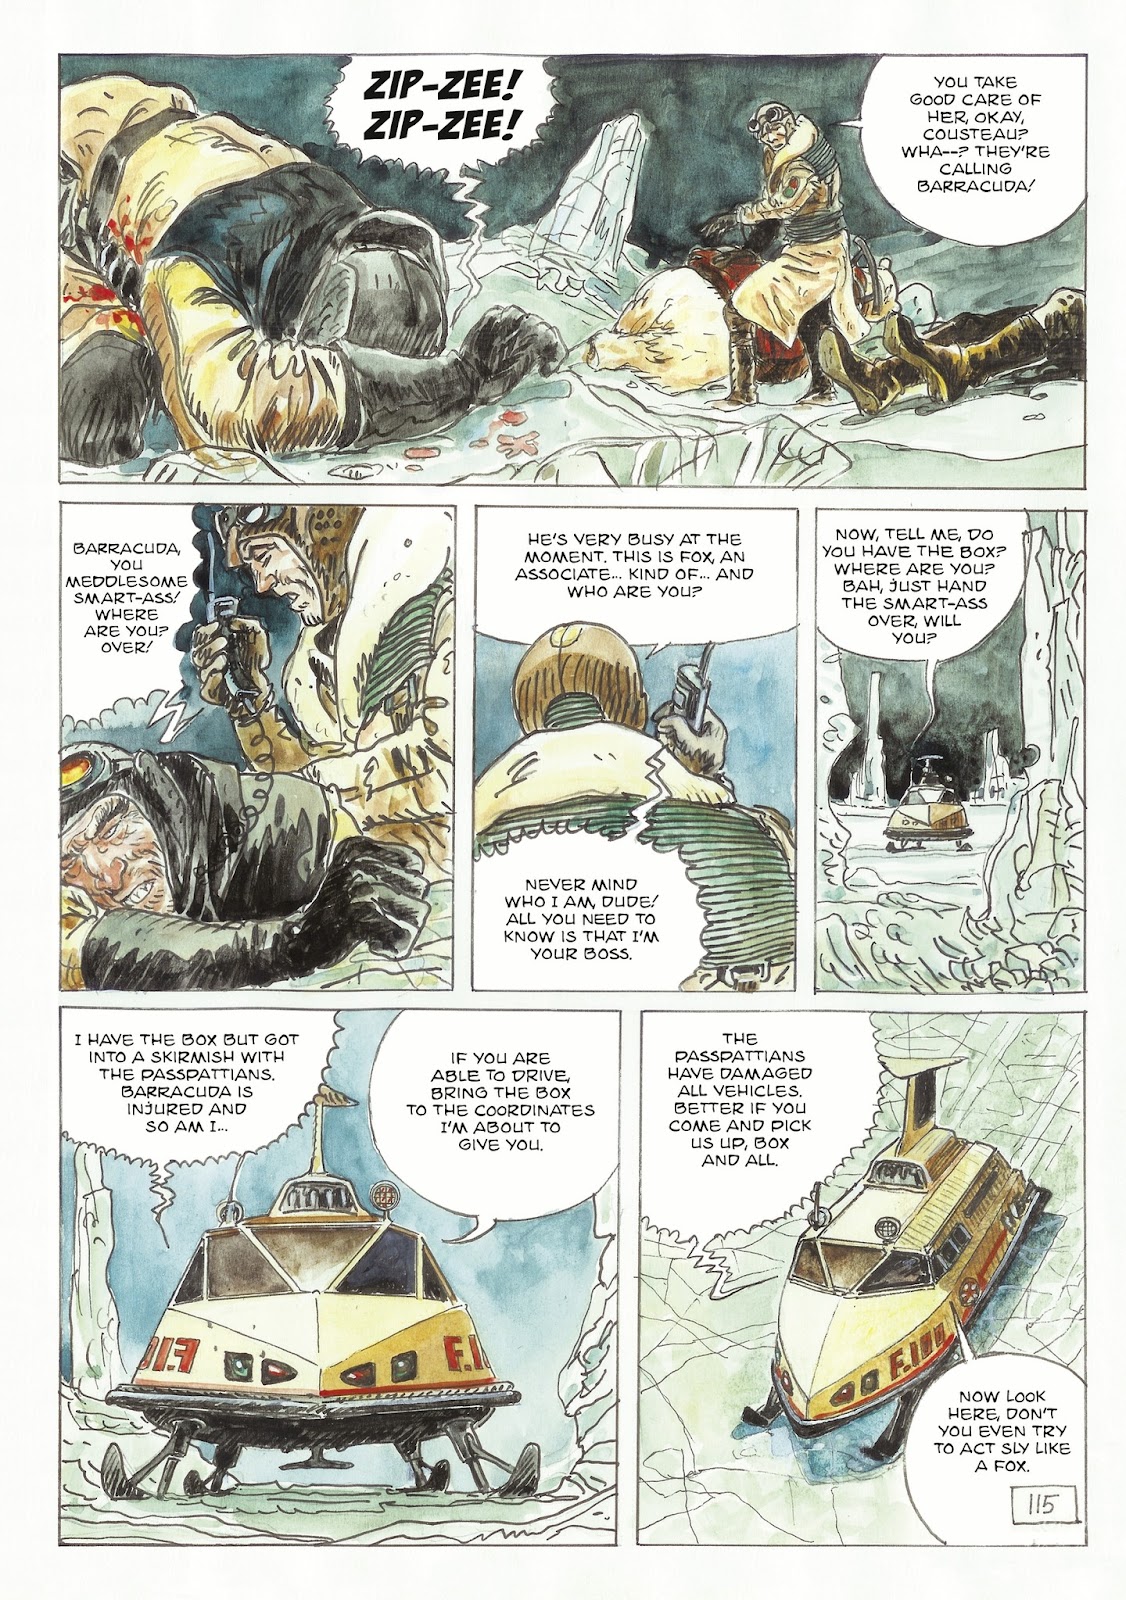 The Man With the Bear issue 2 - Page 61